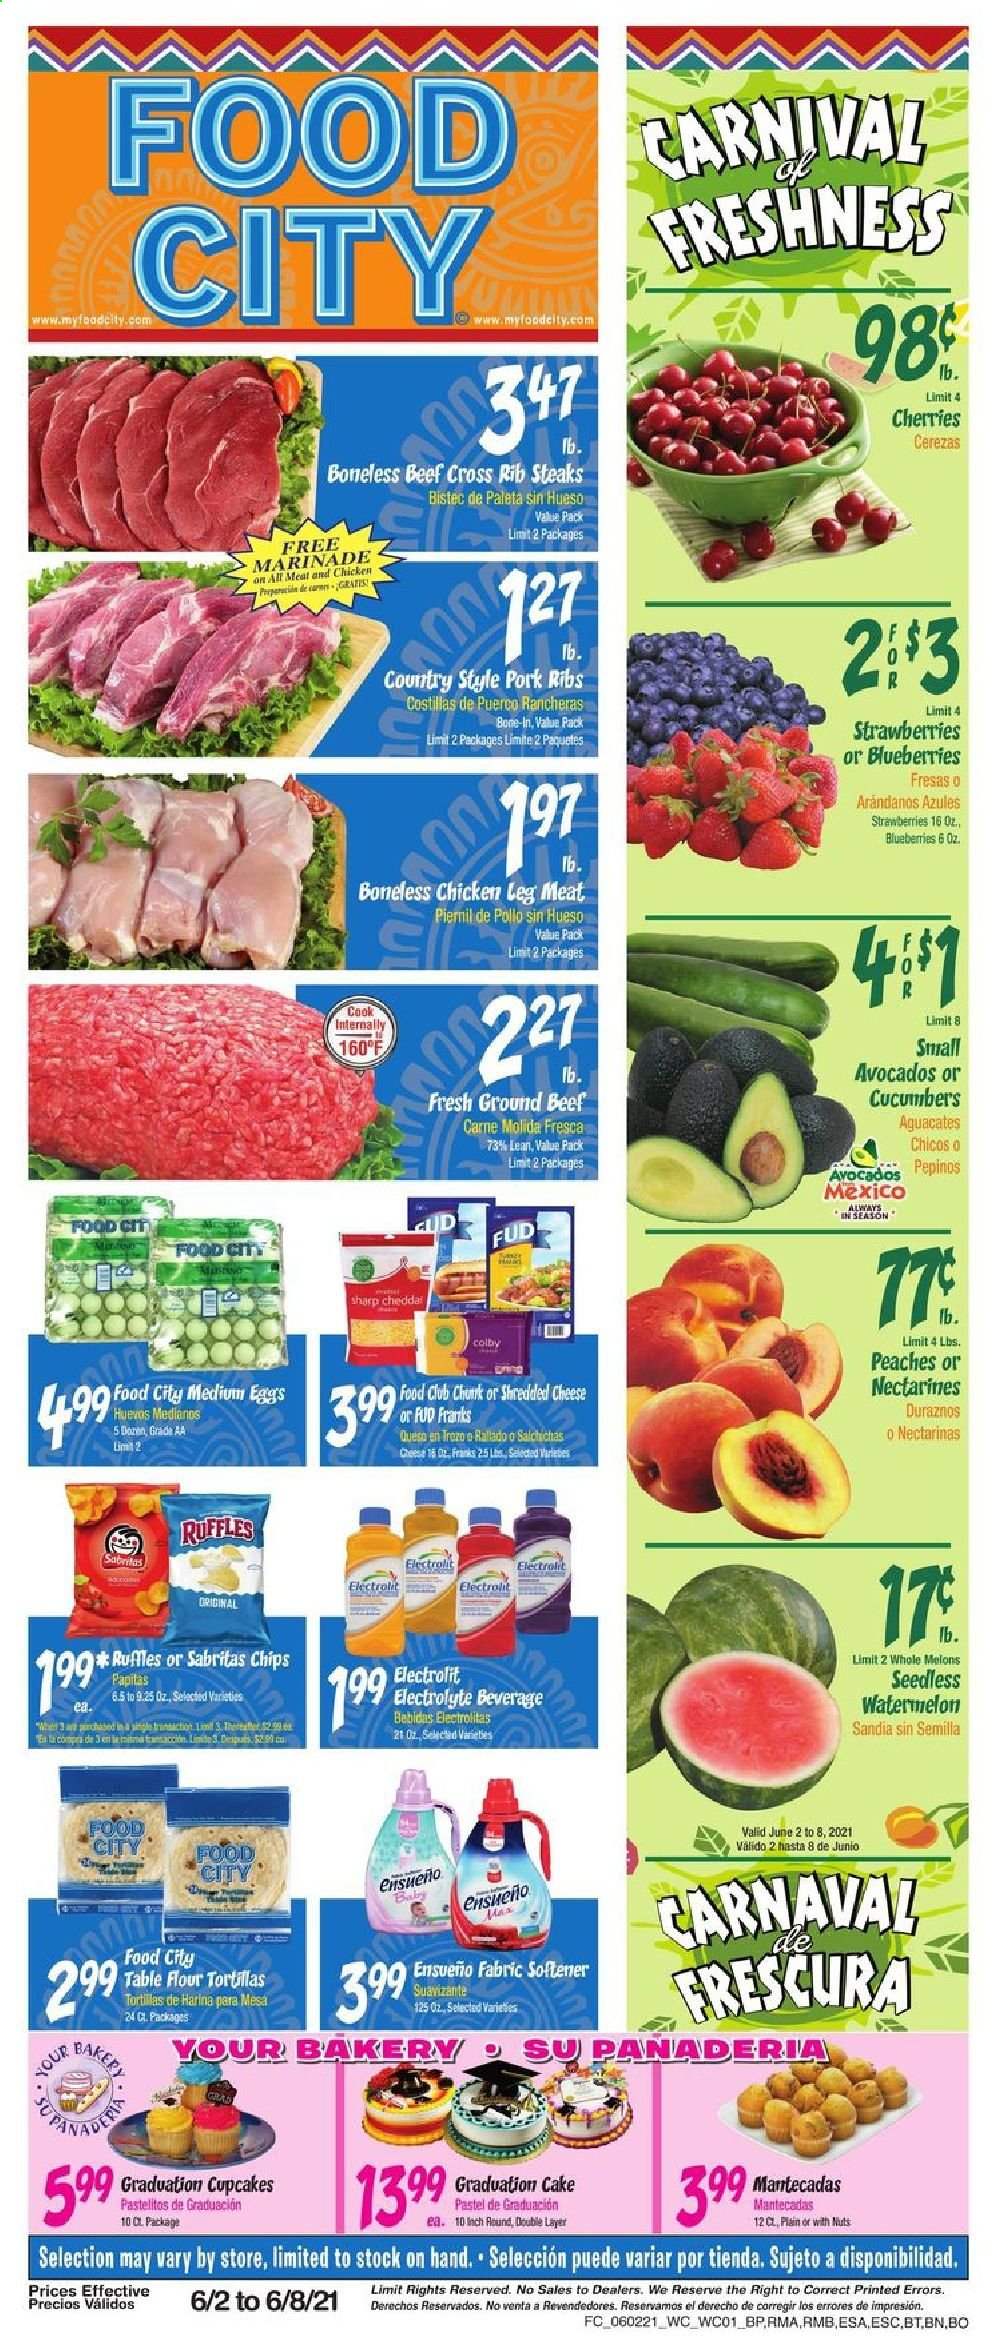 thumbnail - Food City Flyer - 06/02/2021 - 06/08/2021 - Sales products - tortillas, cake, flour tortillas, cupcake, cucumber, avocado, blueberries, strawberries, watermelon, cherries, Colby cheese, shredded cheese, eggs, chips, Ruffles, marinade, chicken legs, beef meat, ground beef, steak, pork meat, pork ribs, nectarines, melons, peaches. Page 1.